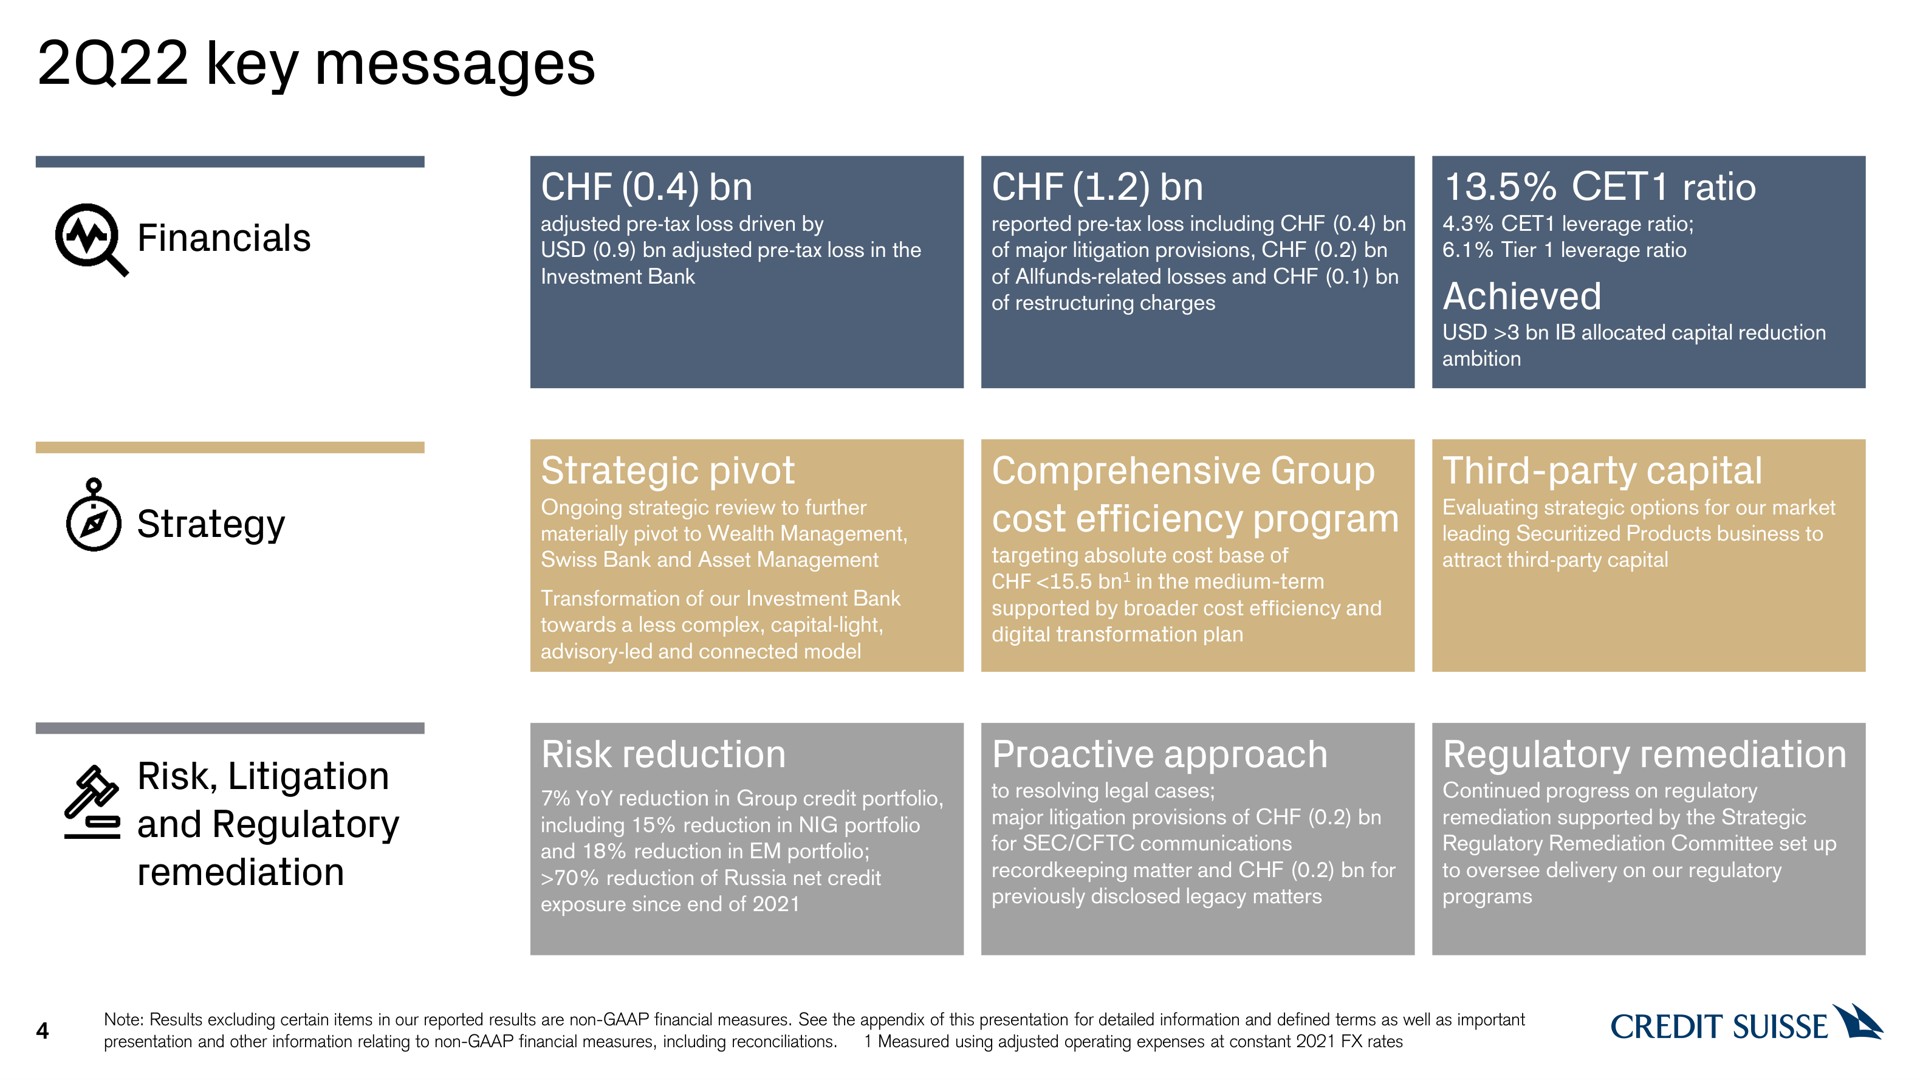 key messages strategy strategic pivot comprehensive group cost efficiency program ratio achieved third party capital risk litigation and regulatory remediation risk reduction approach regulatory remediation credit | Credit Suisse